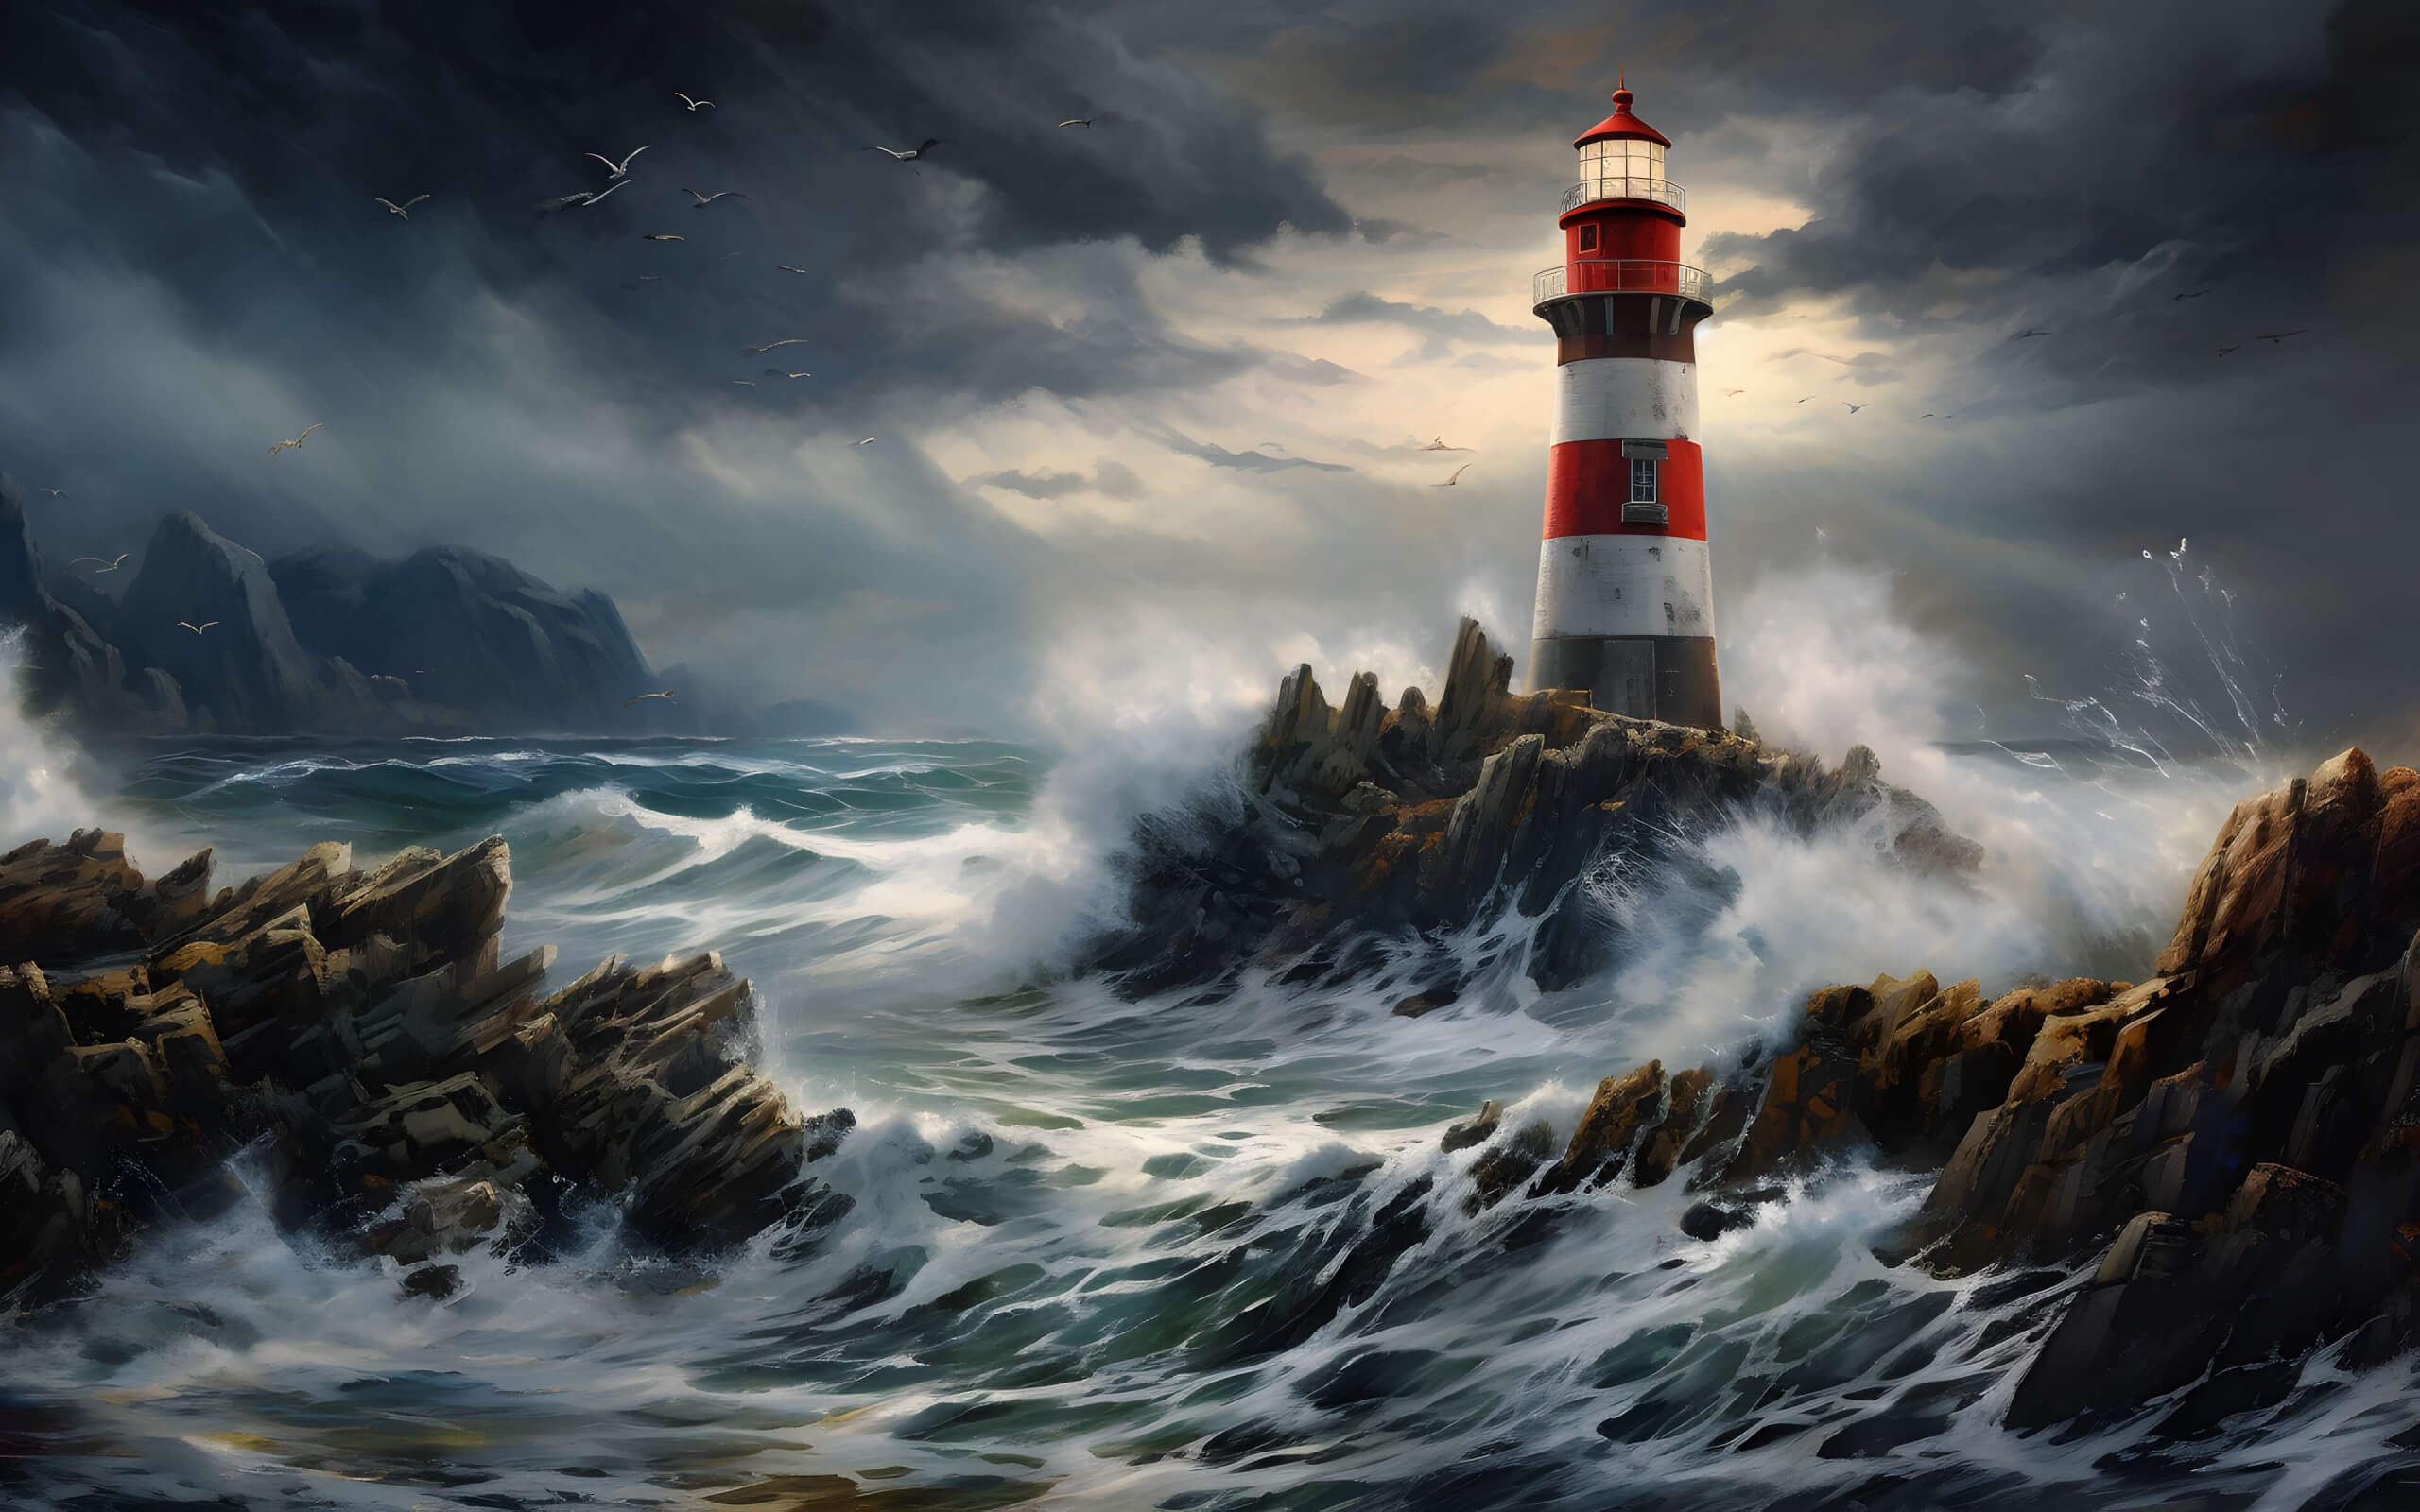 Lighthouse in the ocean waves wallpaper 2560x1600